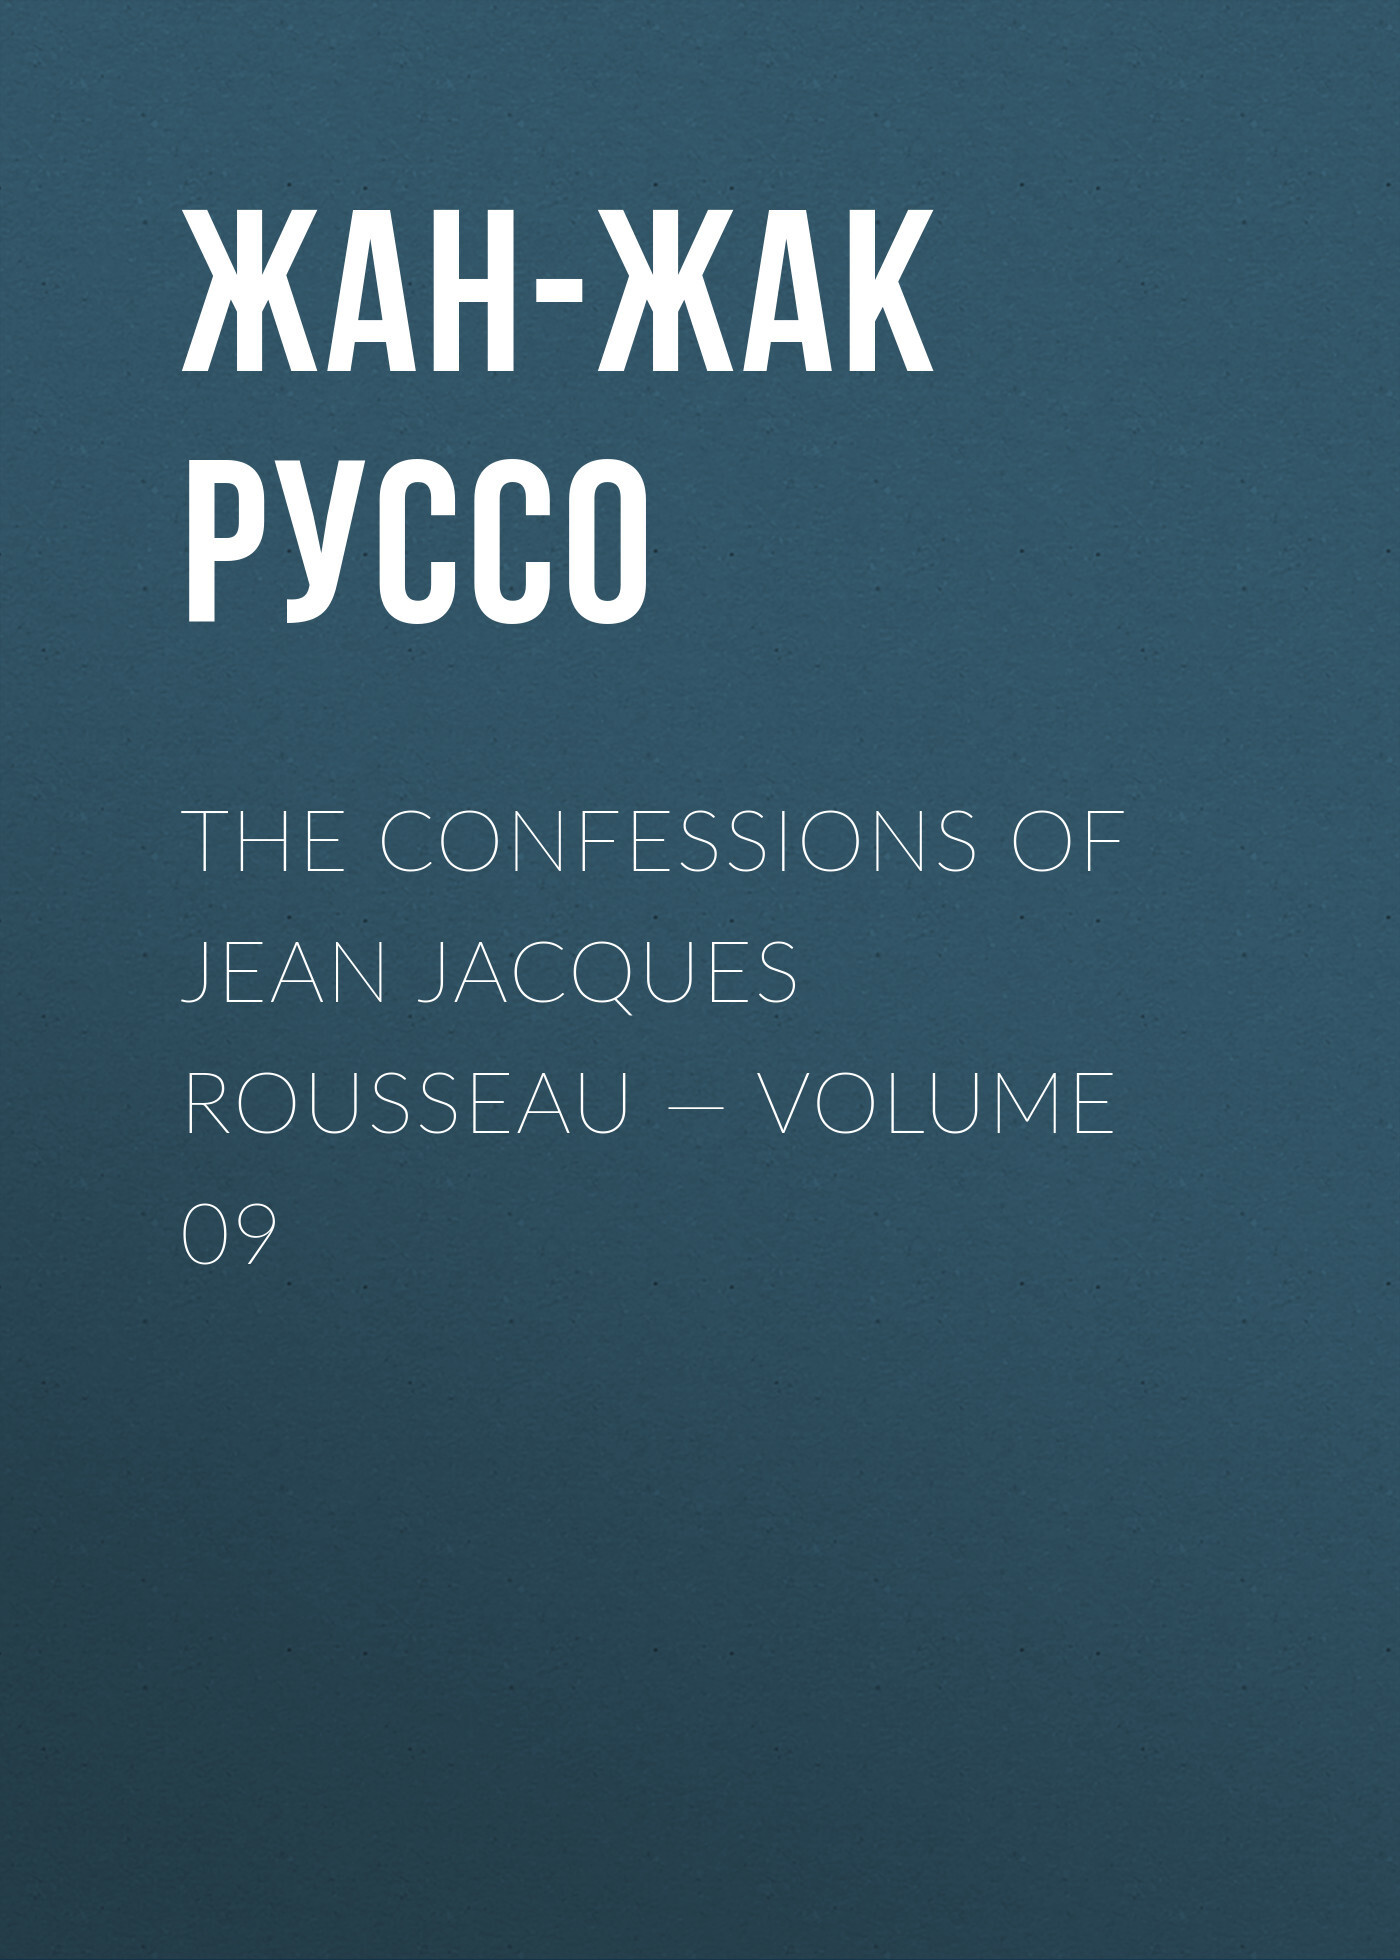 The Confessions of Jean Jacques Rousseau— Volume 09